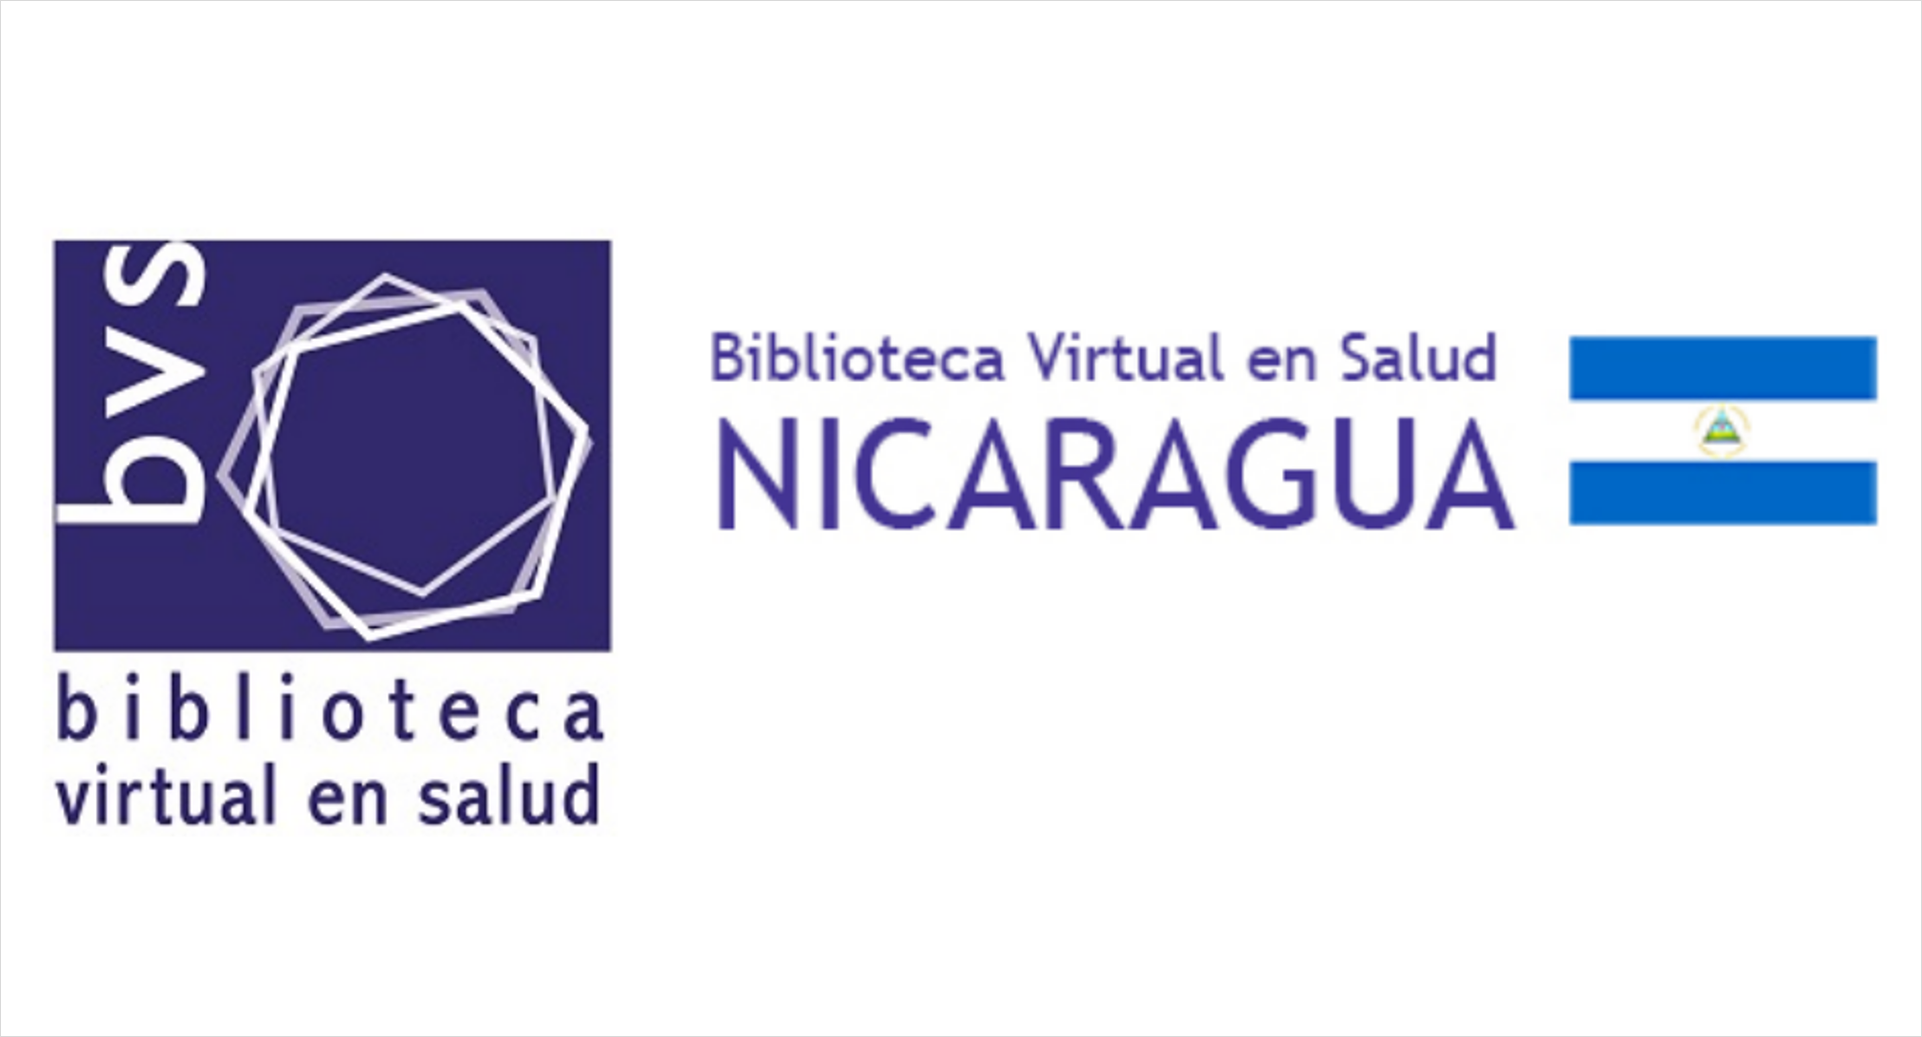 webinar-on-scholarly-communication-for-users-of-the-nicaragua-vhl